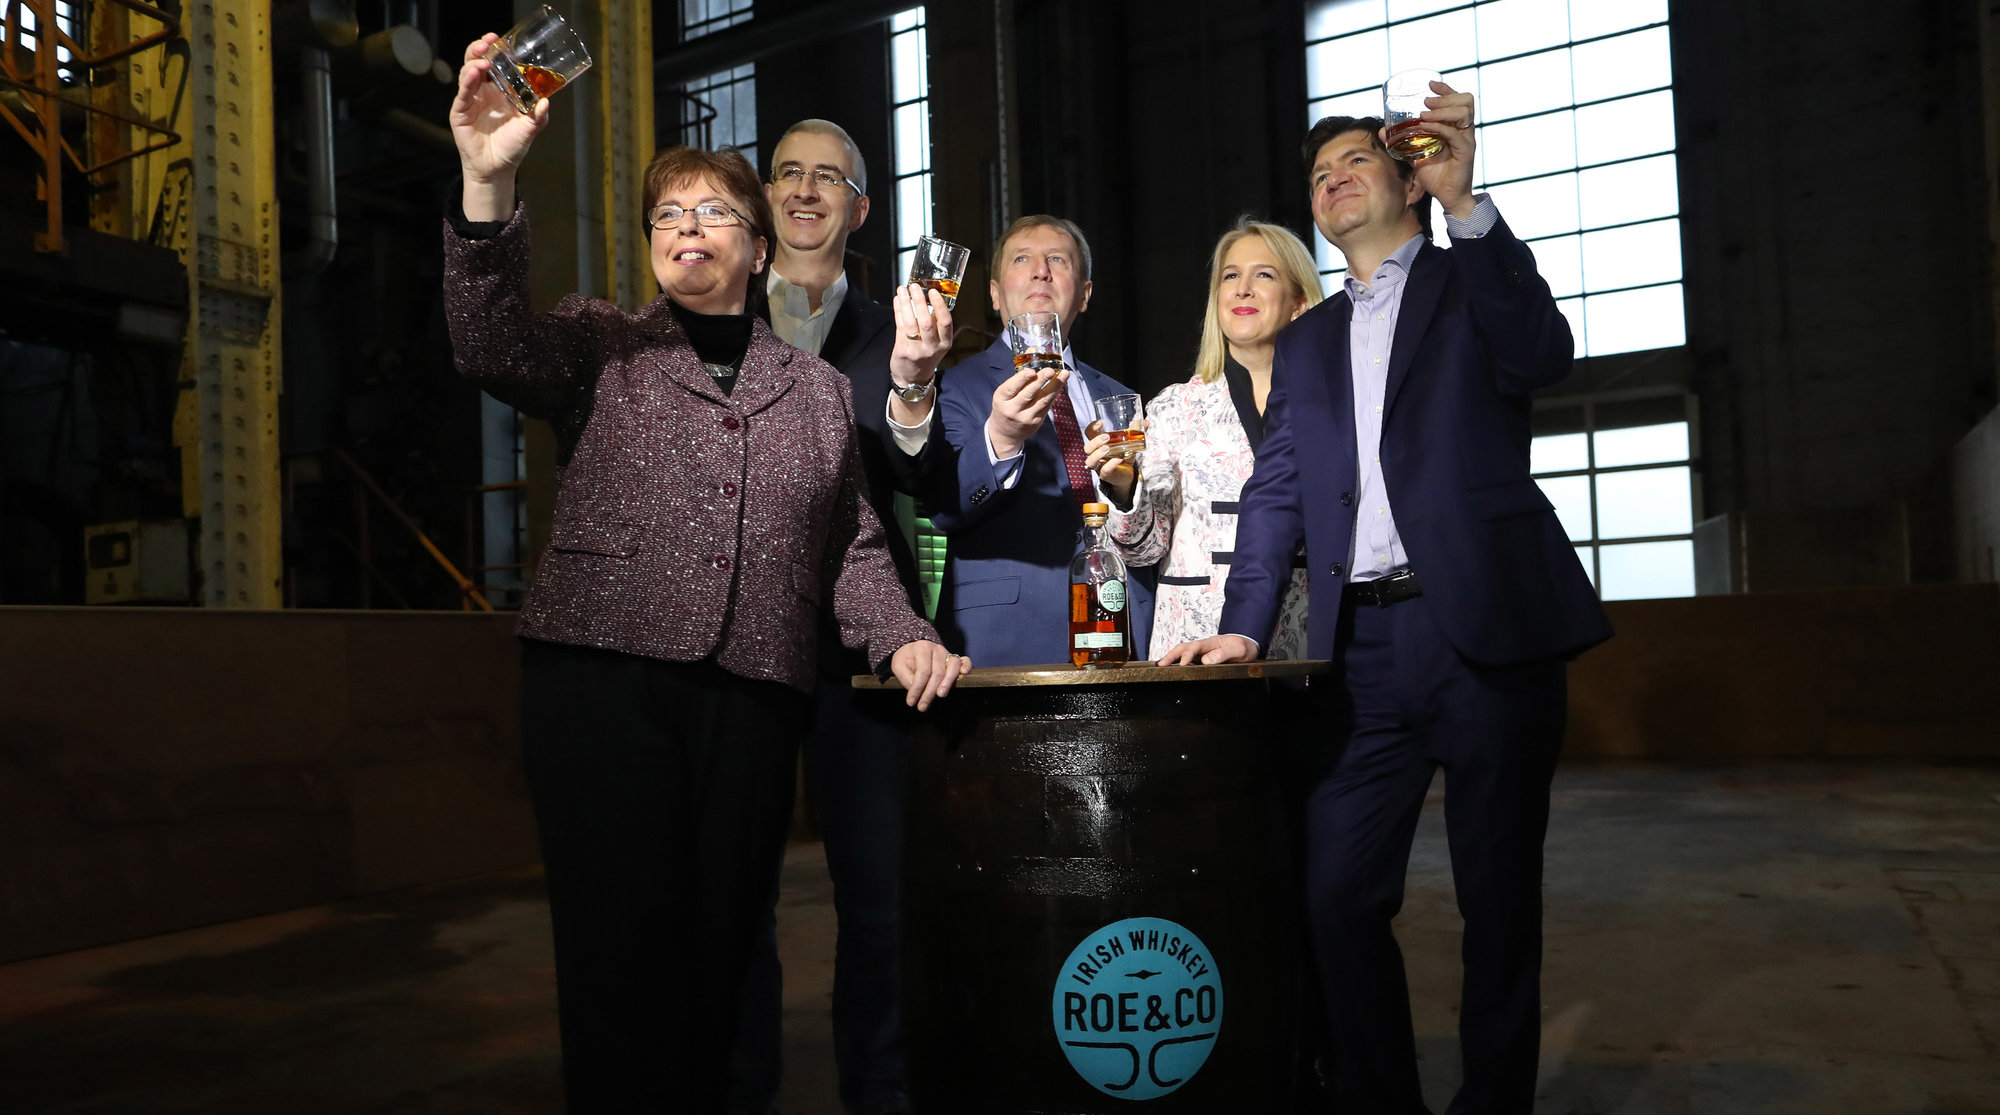 Toast to Roe (from left): Diageo’s Master Blender Caroline Martin, Diageo's Operations Director Colin O' Brien, Minister for Agriculture Michael Creed, General Manager of Reserve Europe Tanya Clarke and Diageo Ireland's Country Manager Oliver Loomes at the announcement today in St James’s Gate.